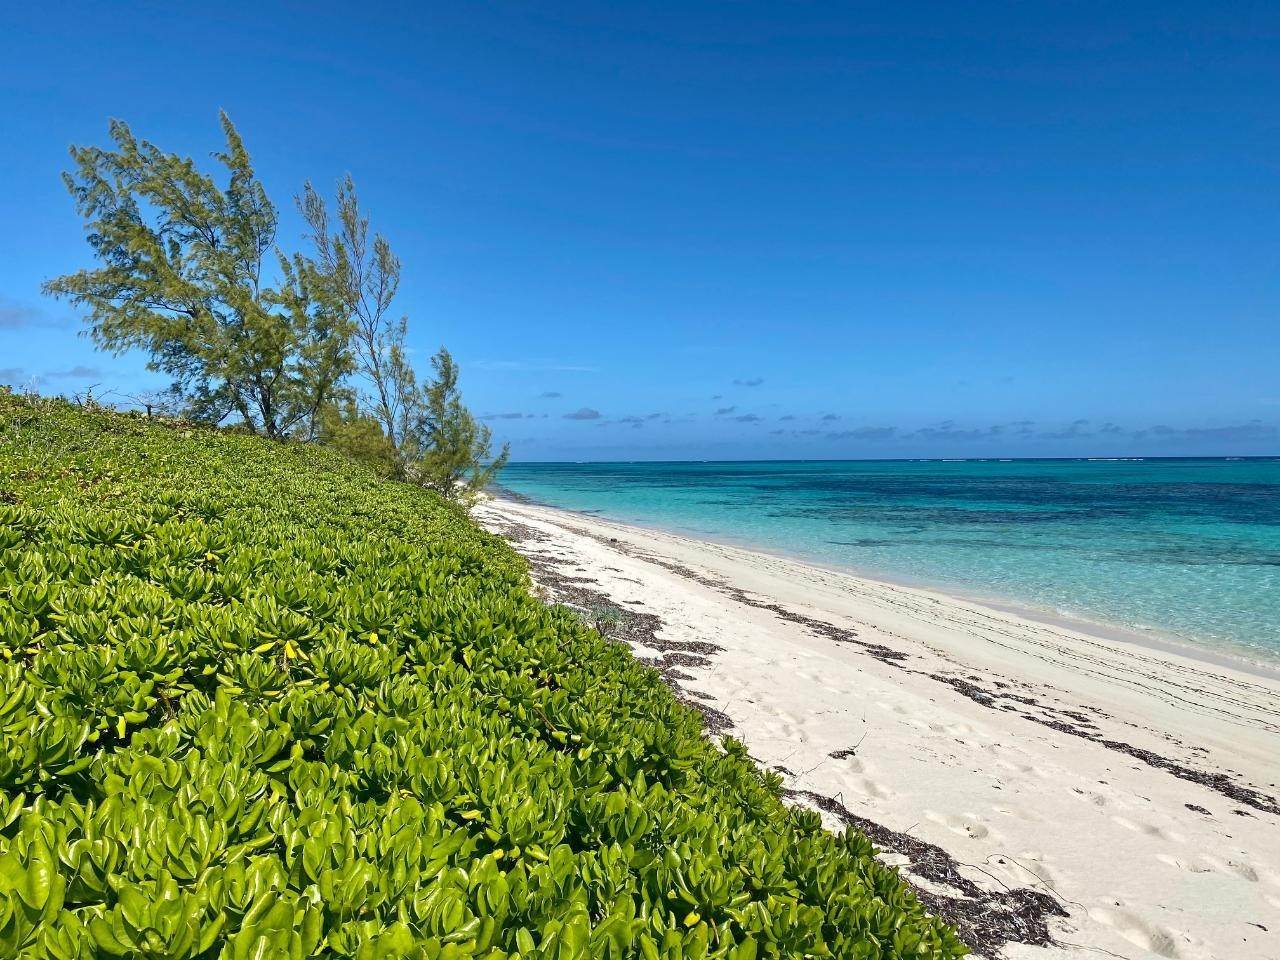 12. Lots / Acreage for Sale at Old Bight, Cat Island, Bahamas